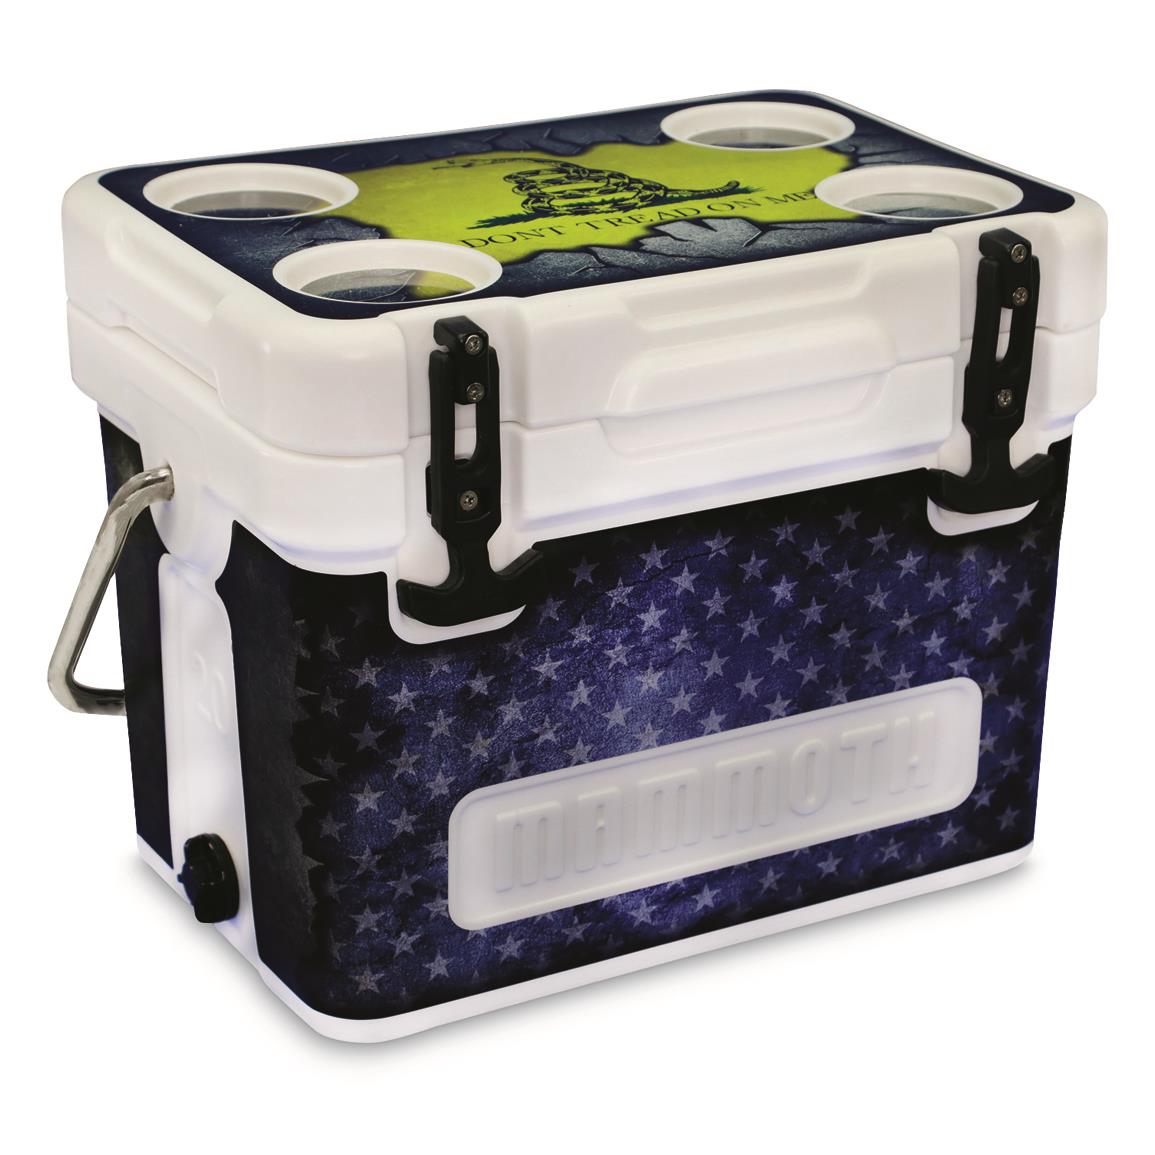 Mammoth Coolers Cruiser 20 Limited Edition 'Don't Tread On Me' Cooler